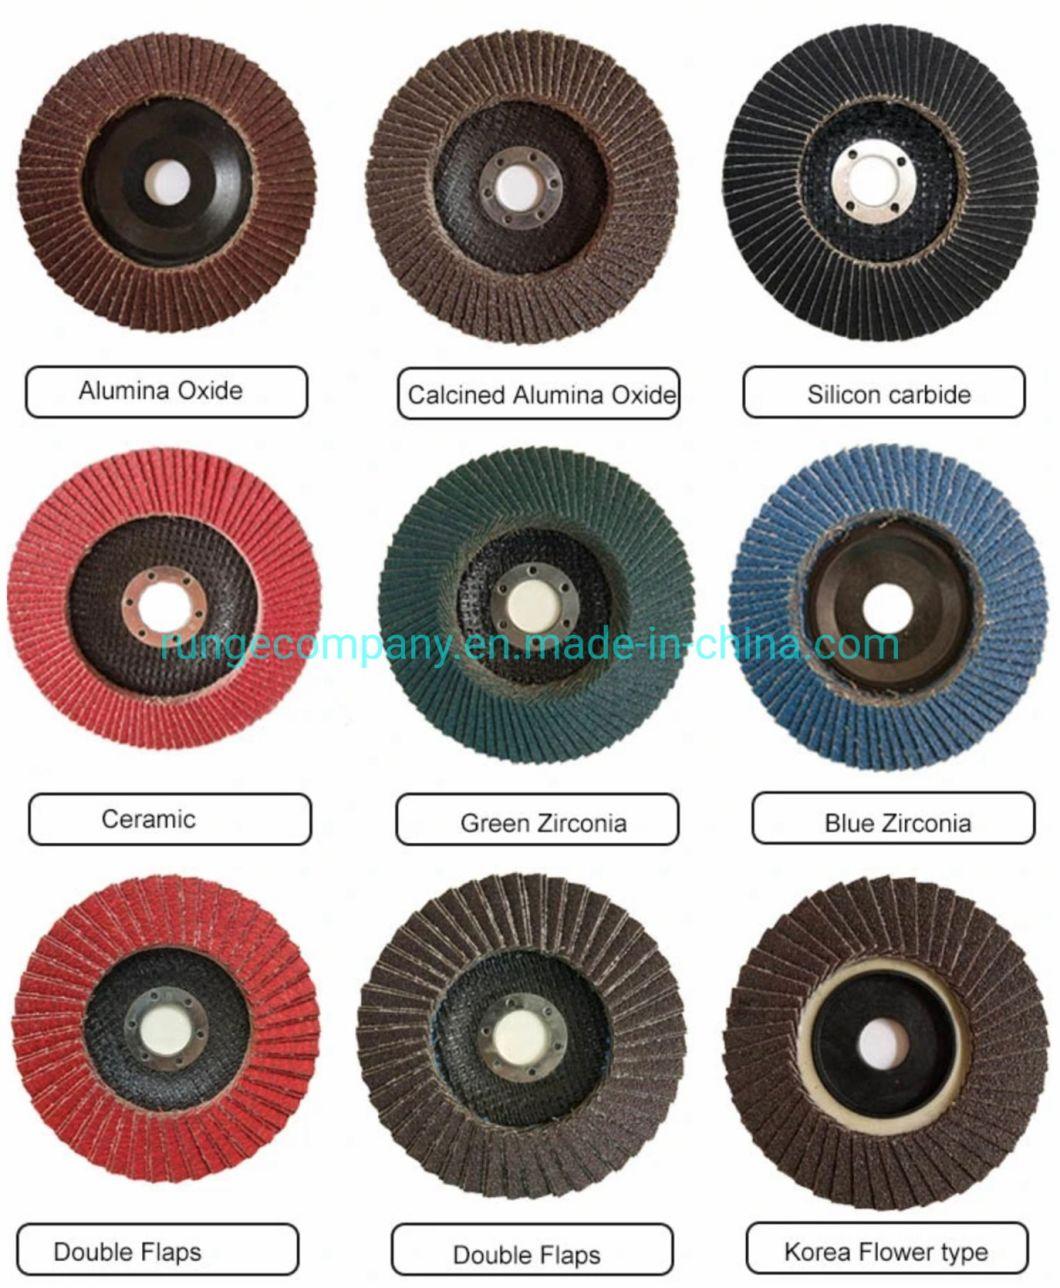 Power Electric Tools Accessories 4.5" Cut off Wheels for Grinders Cutting Discs for Metal & Stainless Steel/Inox